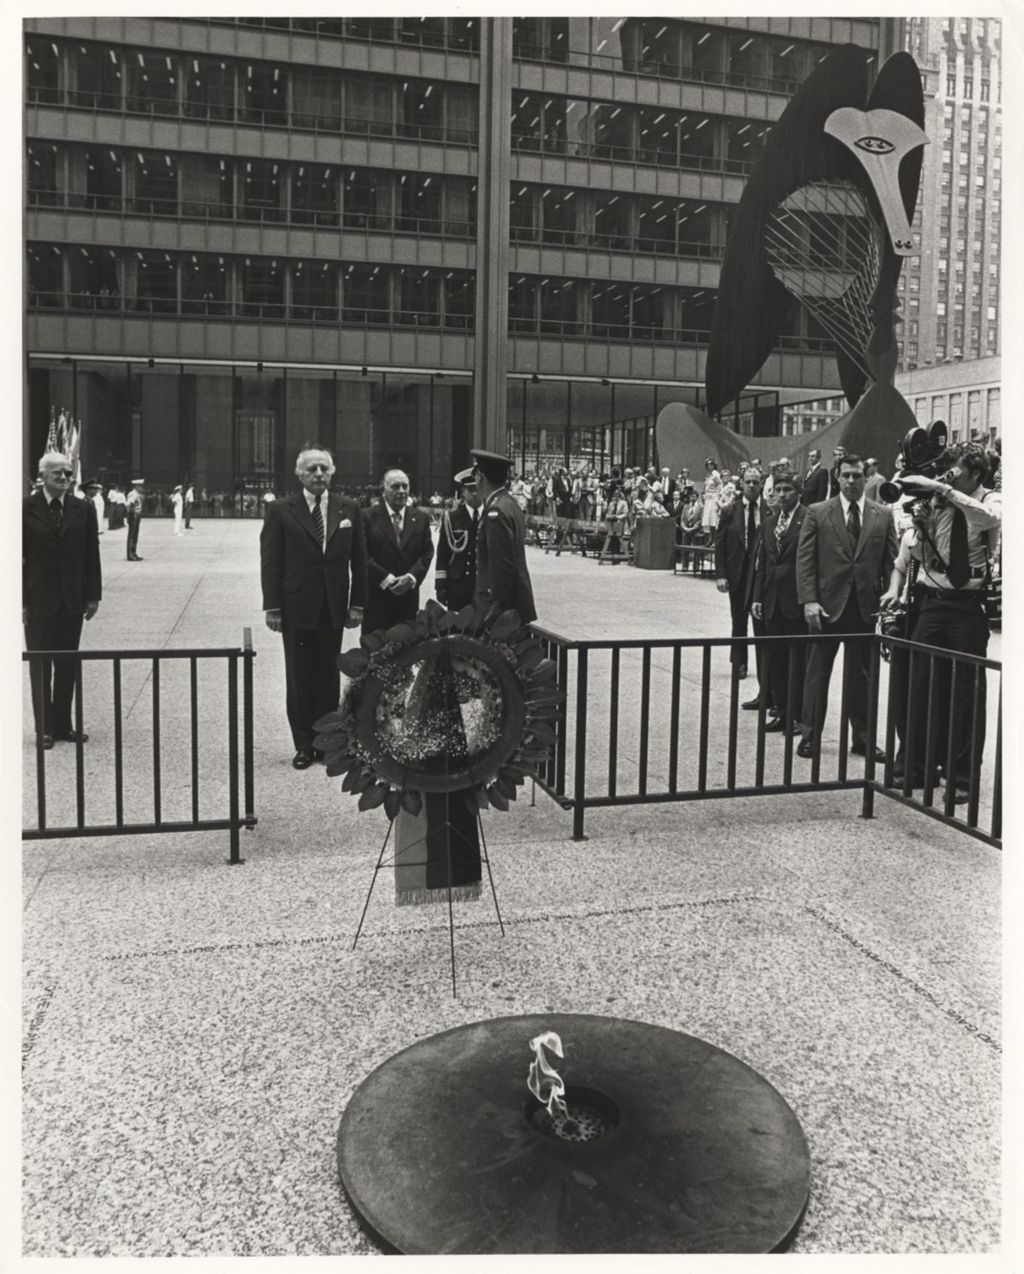 German President Walter Scheel at the eternal flame in Civic Center Plaza